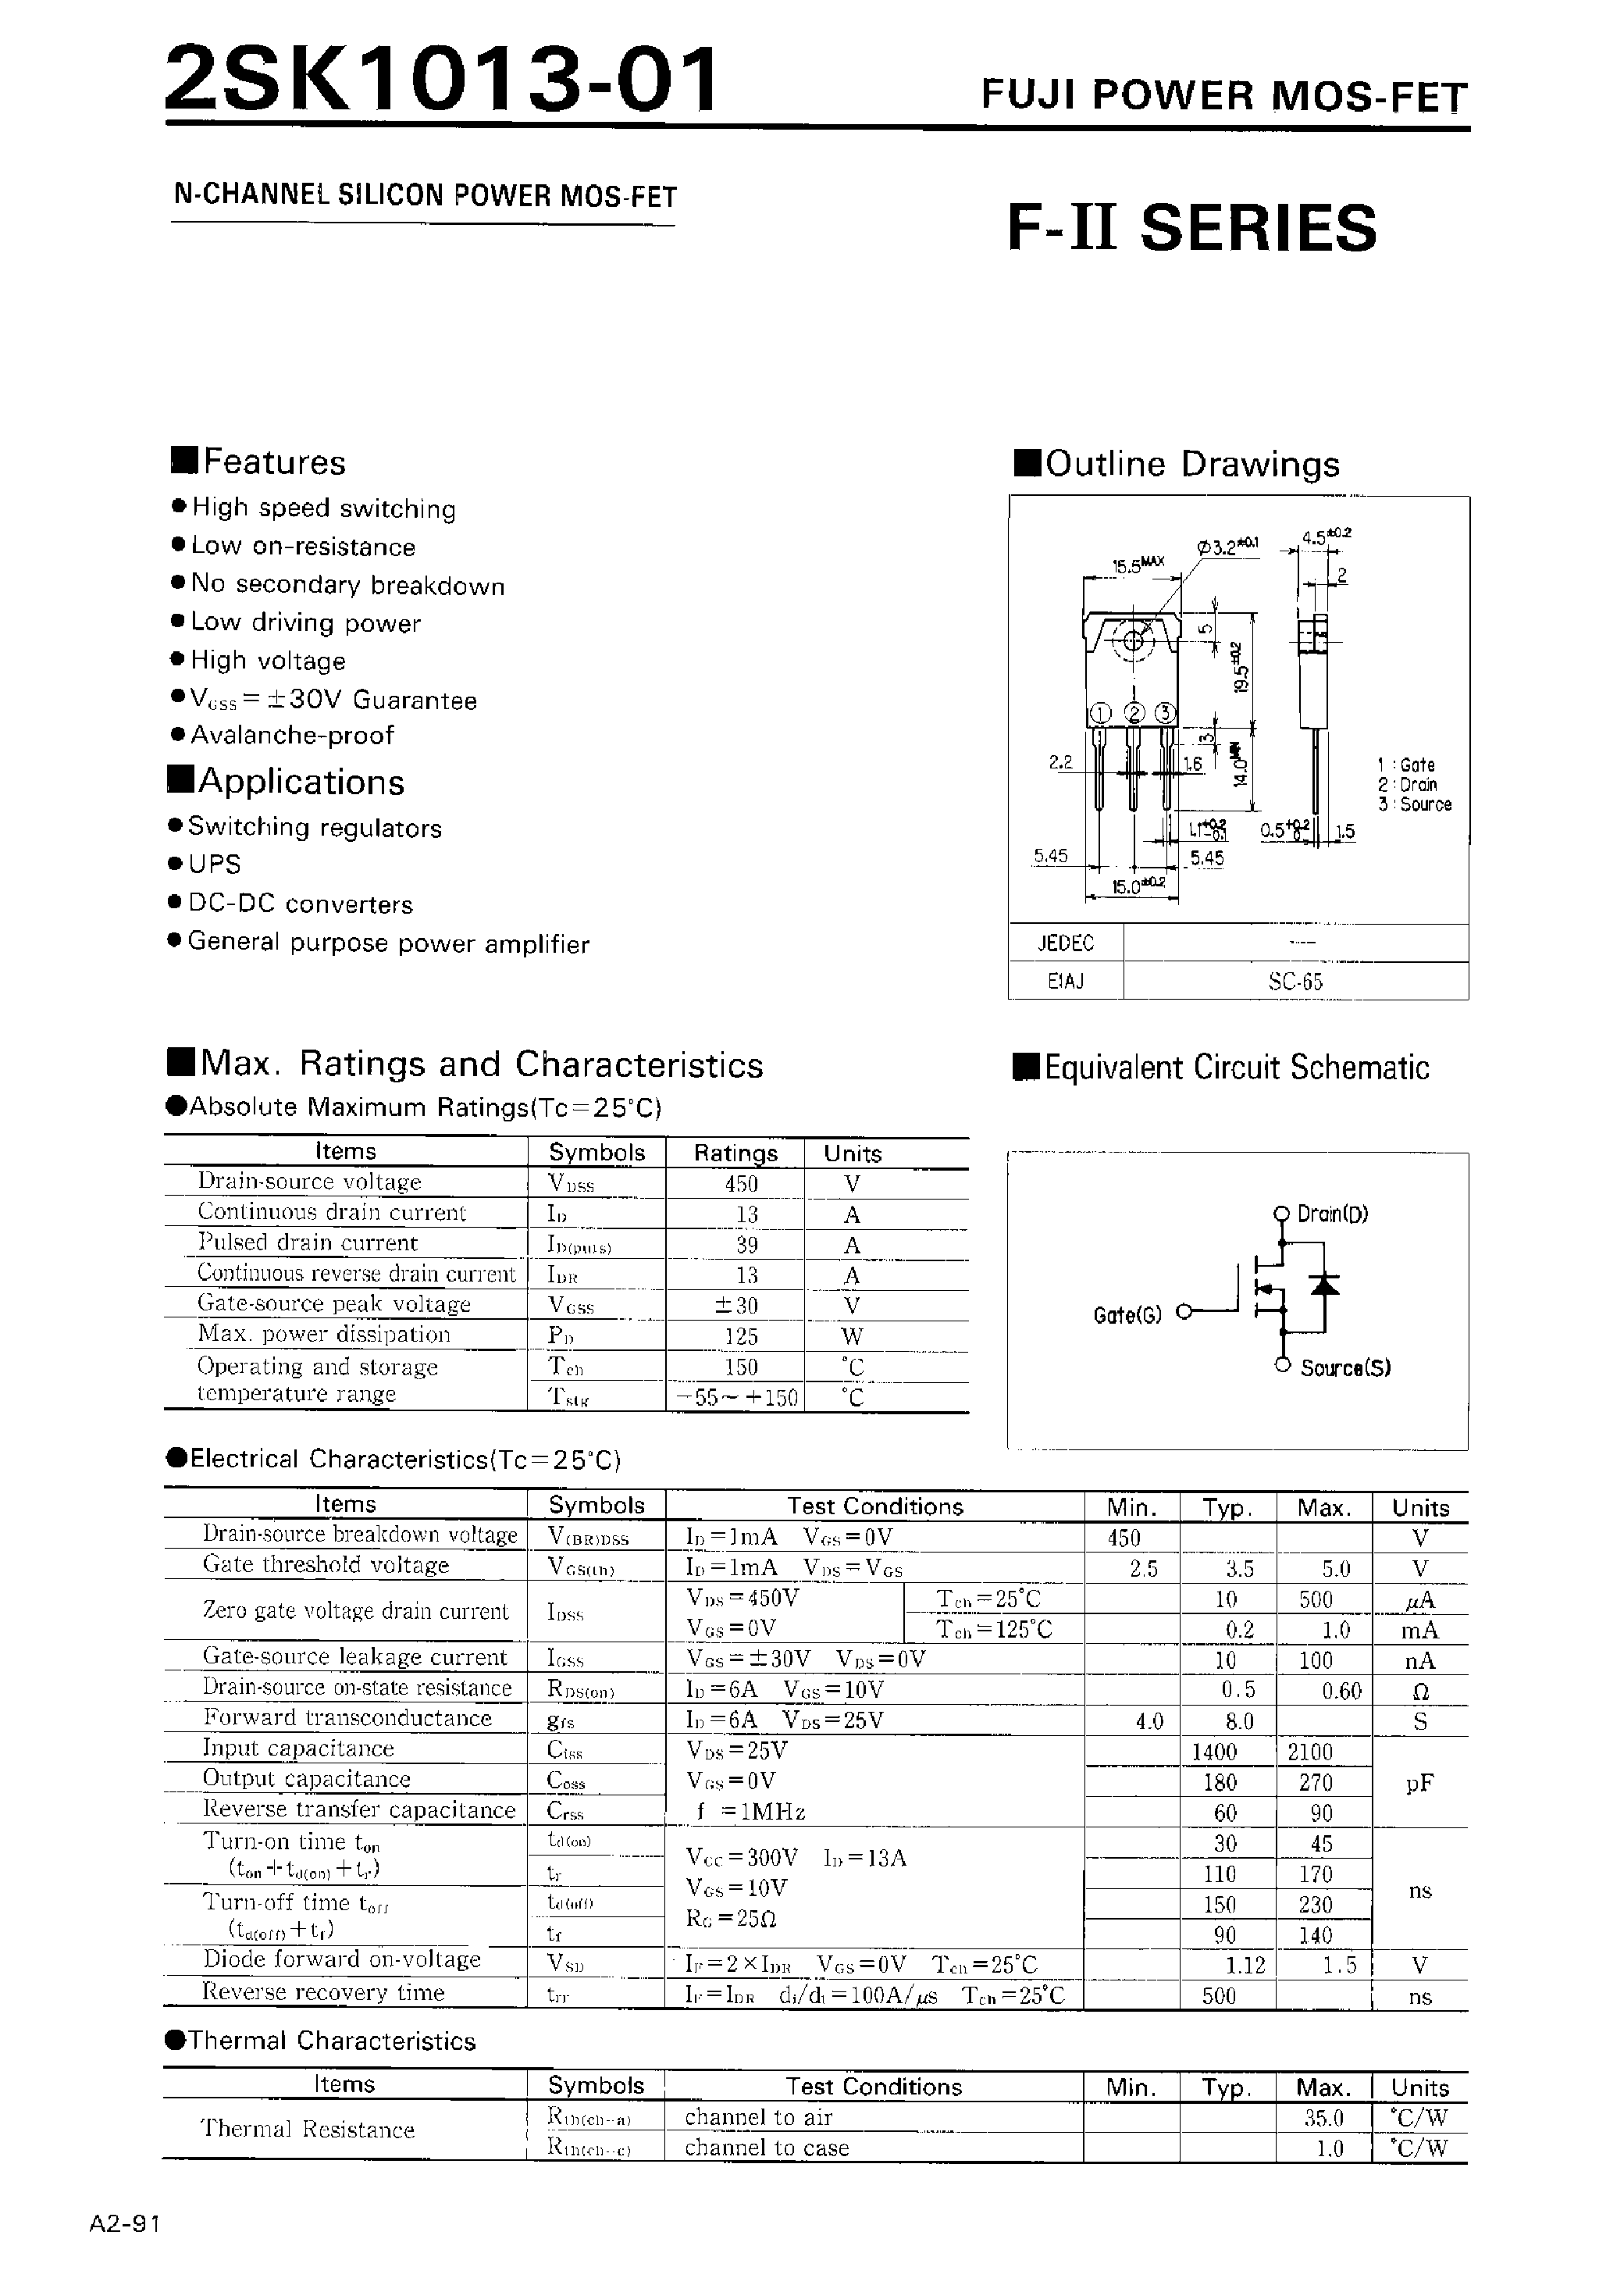 Datasheet 2SK1013-01 - N-CHANNEL SILICON POWER MOSFET page 1